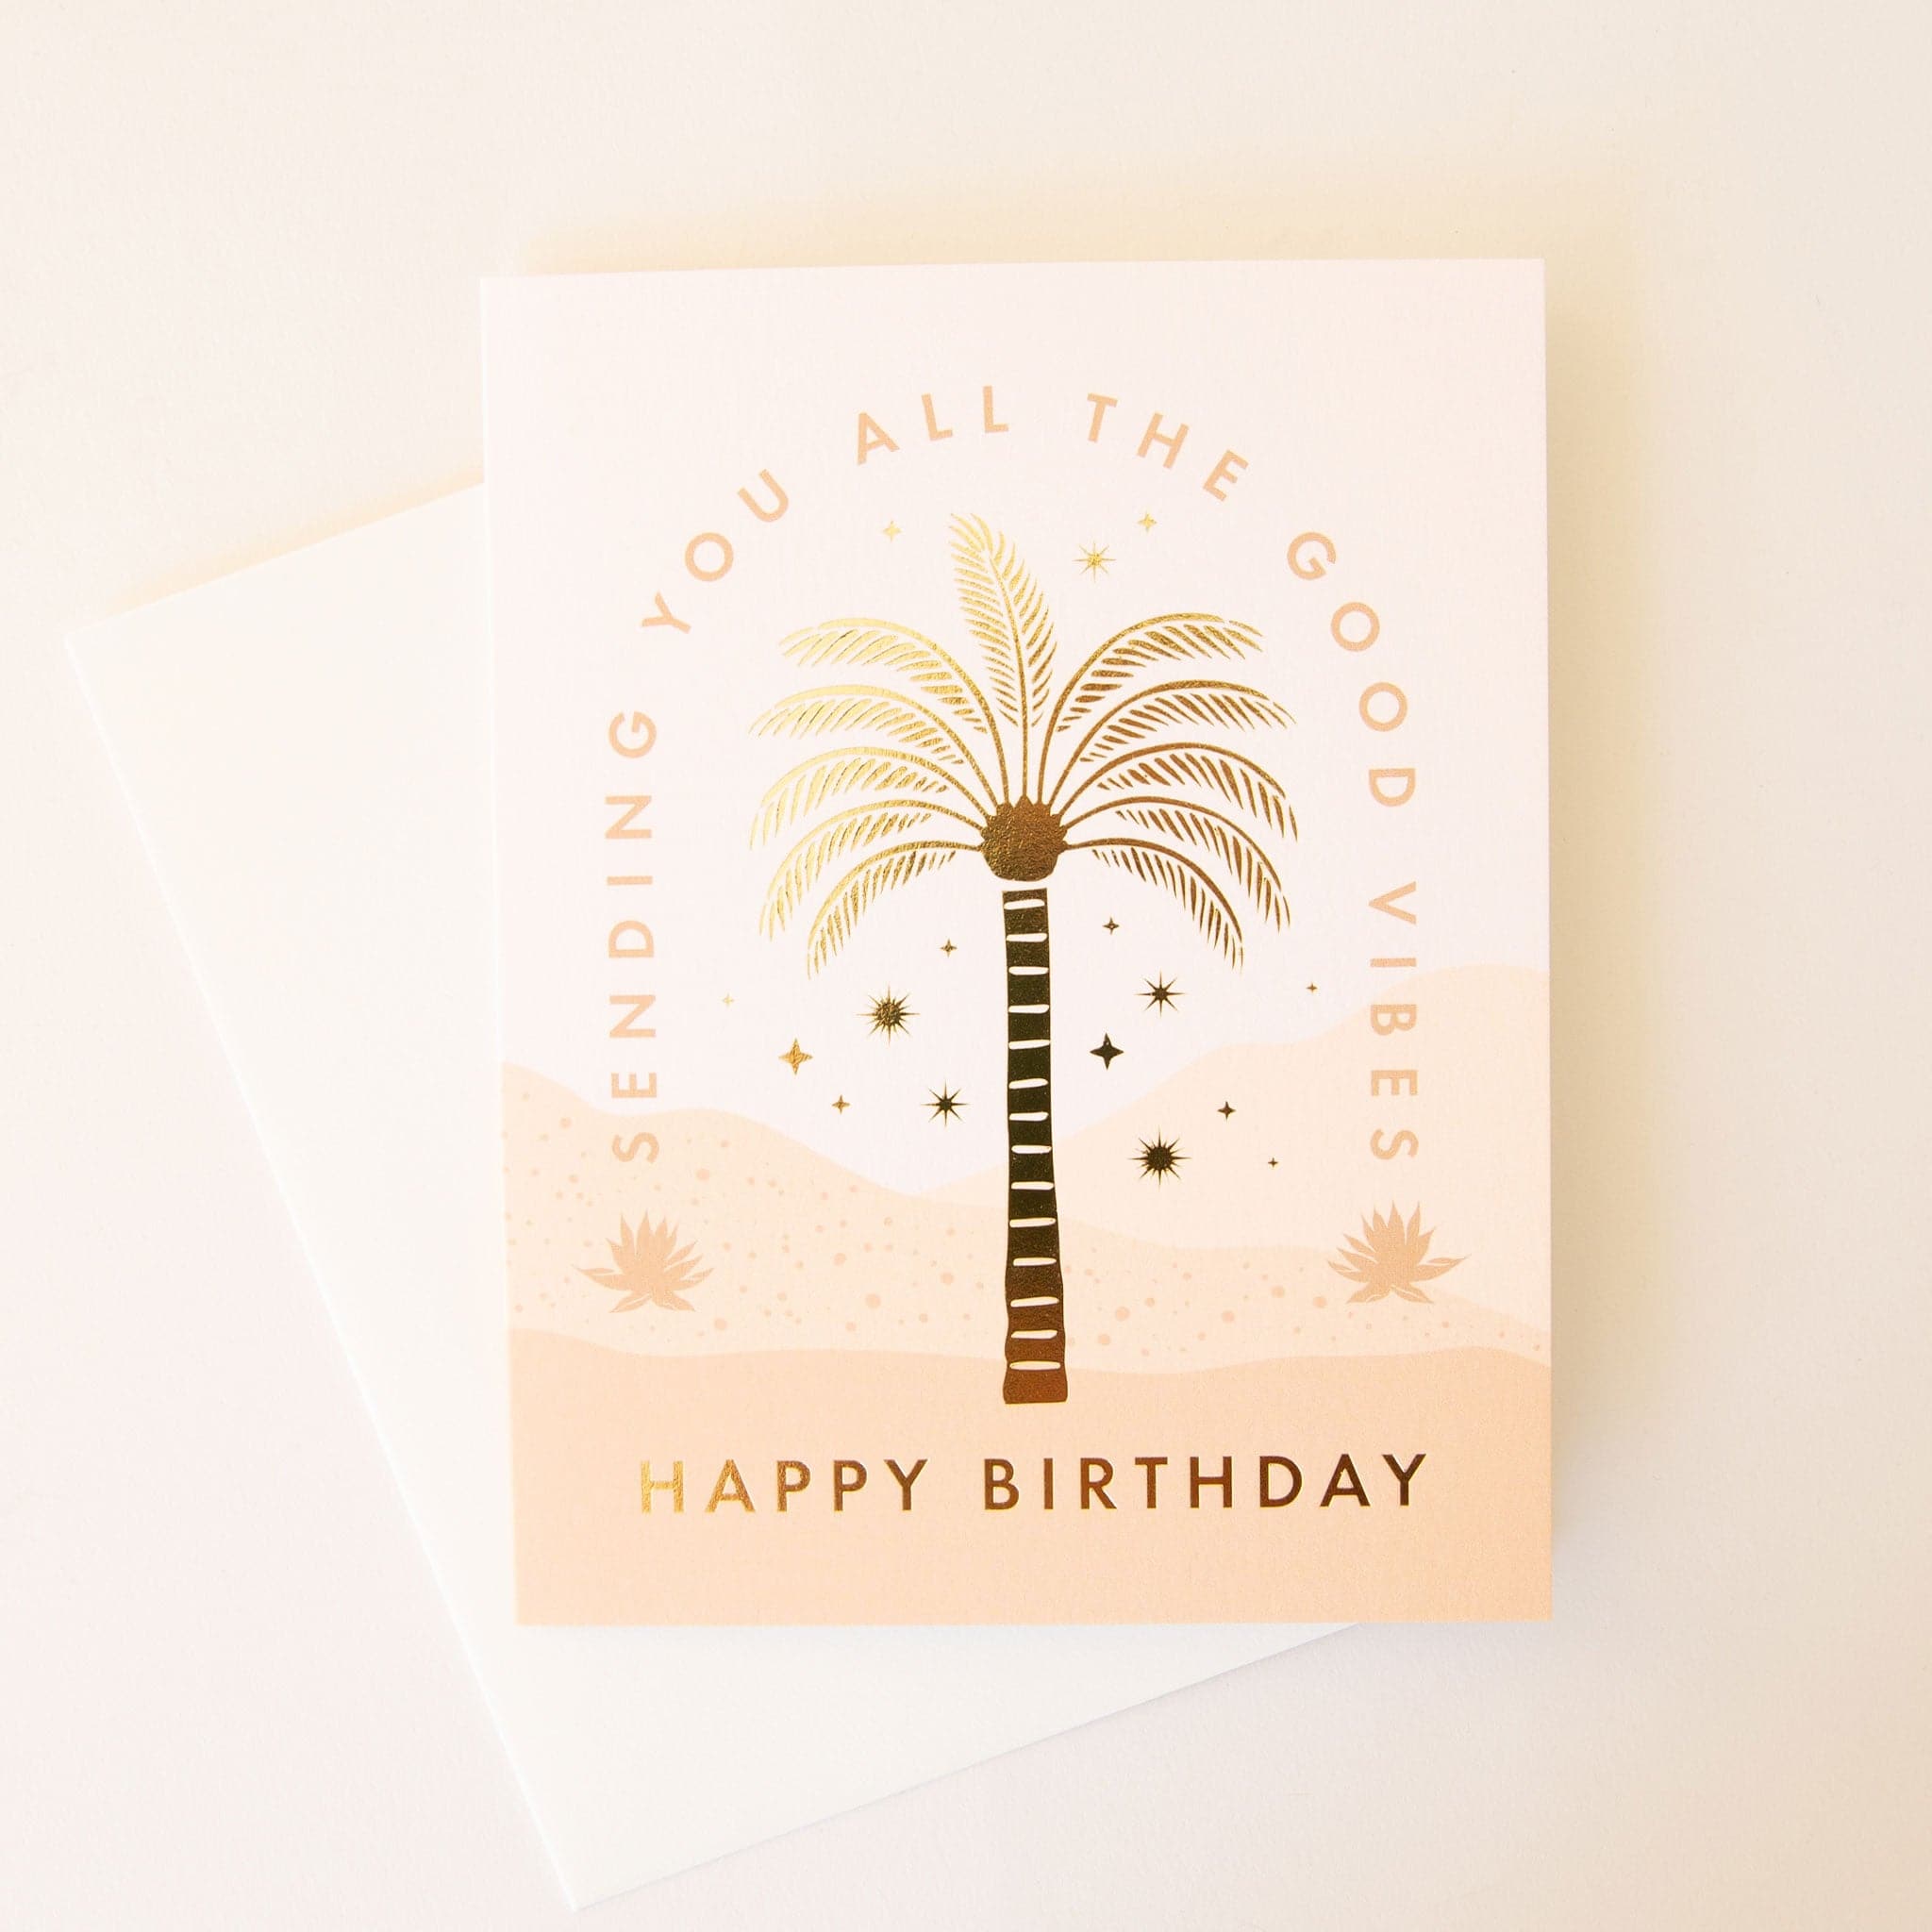 Warm toned birthday card complete with a desert scene. The text 'Sending you all the good vibes' curves around a gold foil palm tree and desert stars. Below the scene reads 'Happy Birthday' in capital gold foil lettering. The card is accompanied by a solid white envelope. 